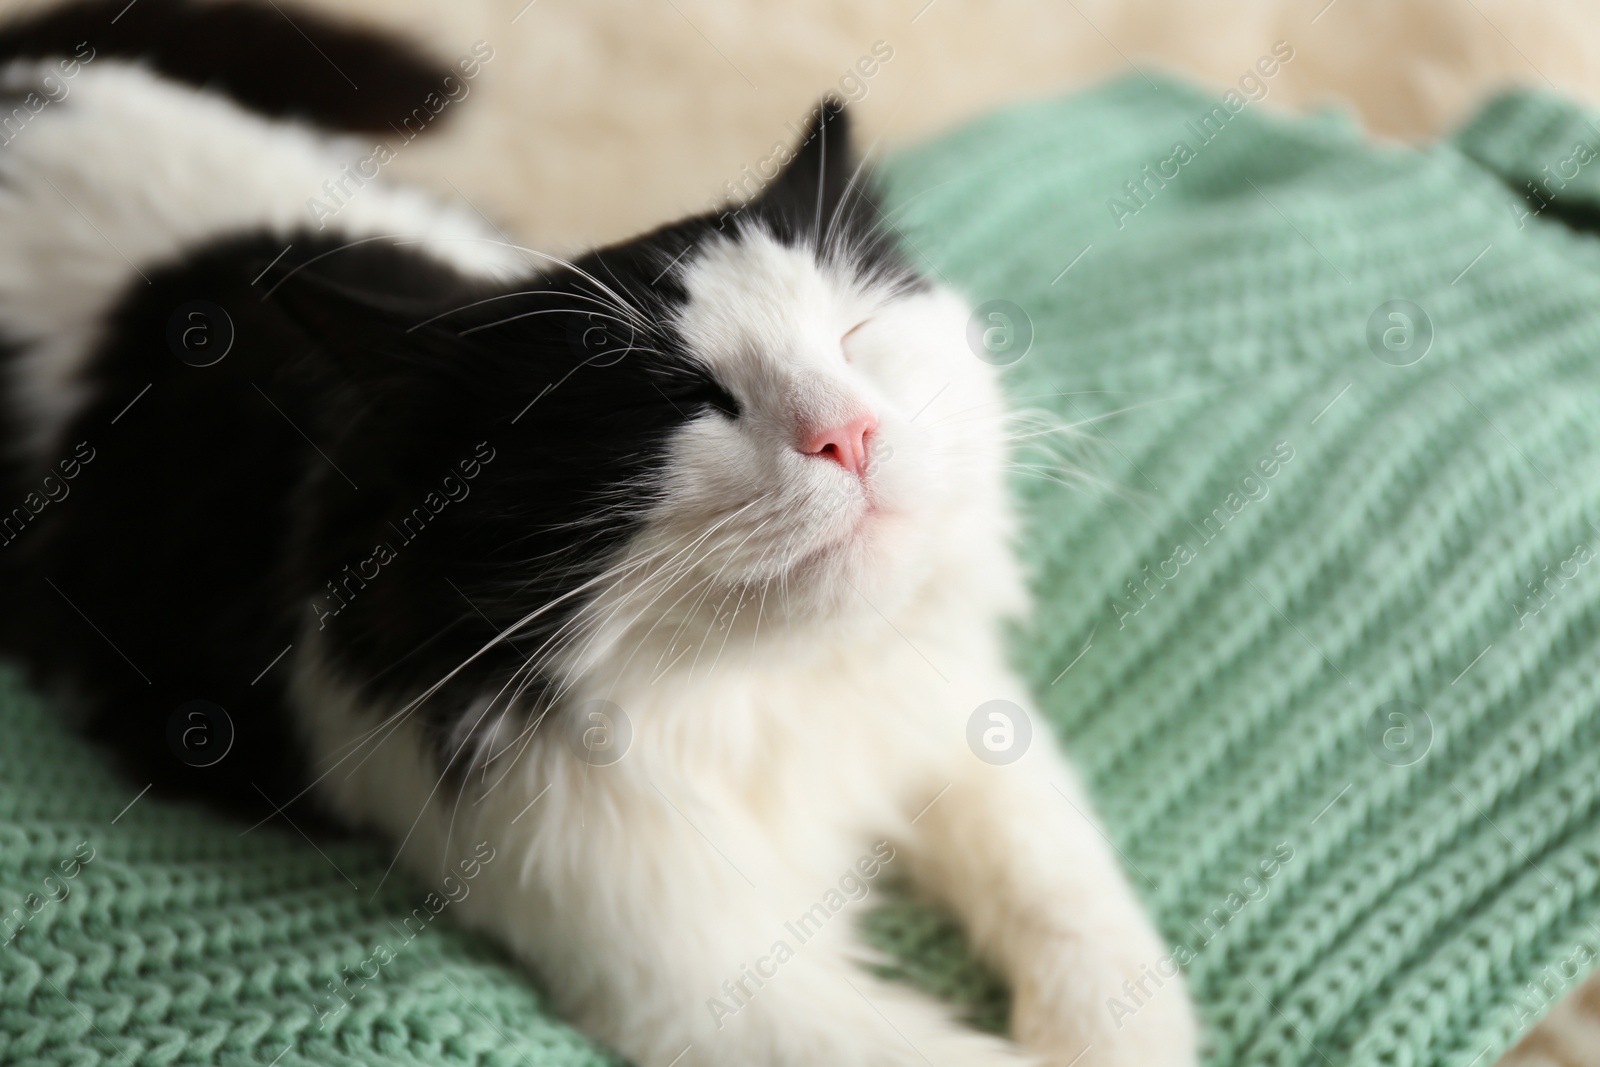 Photo of Cute cat relaxing on green knitted fabric. Lovely pet